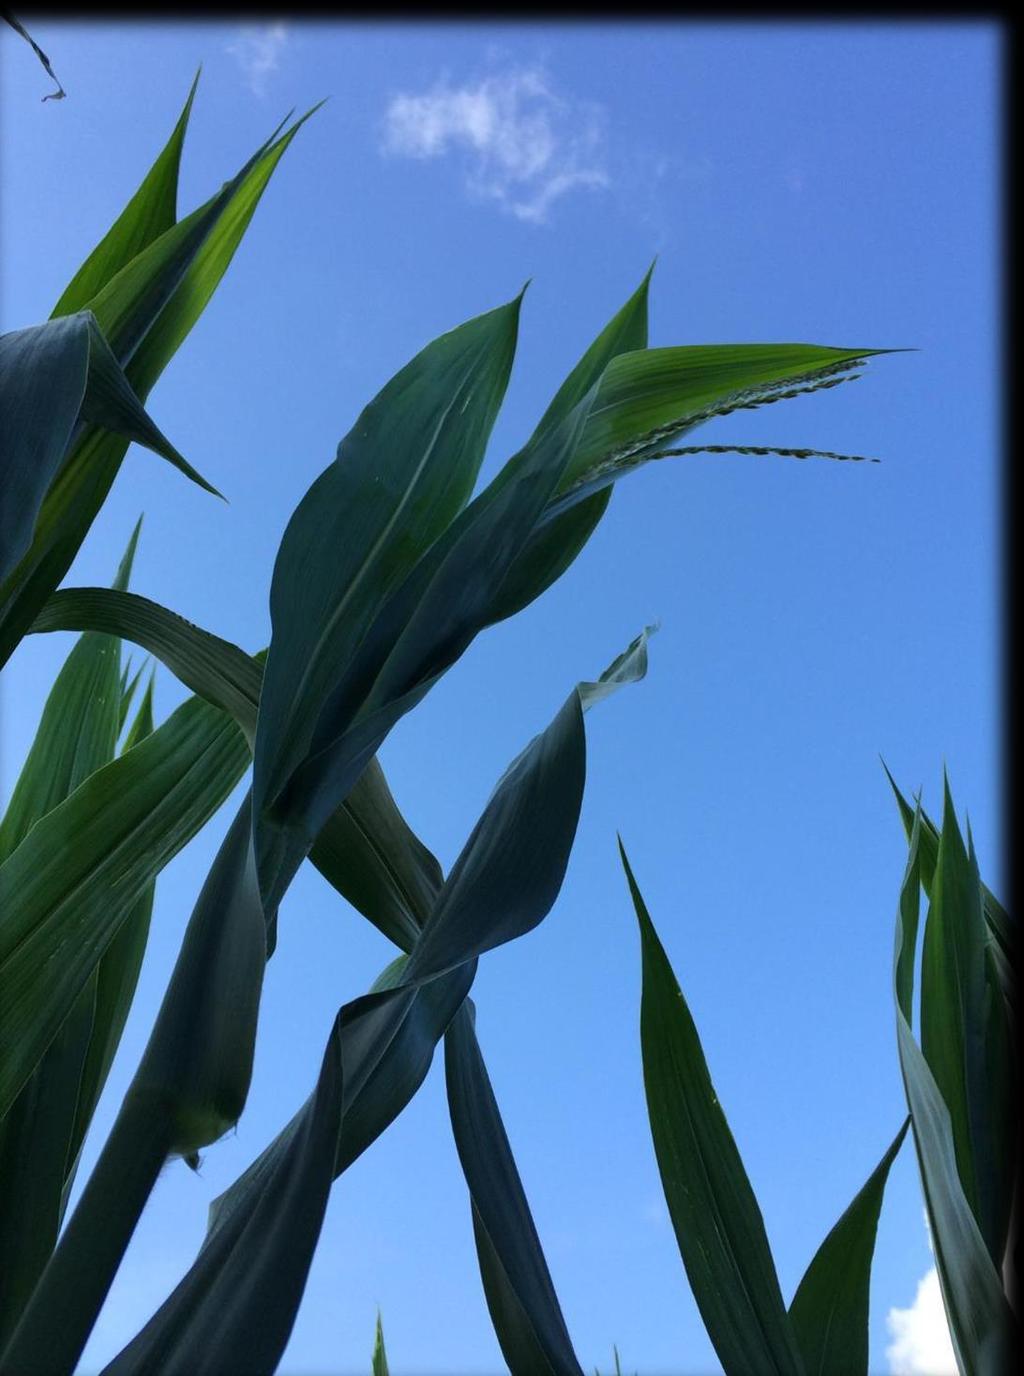 Points to Consider Issue 288 July 14, 2016 Winneshiek County, IA: Tassels starting to show on July 7, 2016 Weather risks are fully customized to each customer s need as a single peril that can be